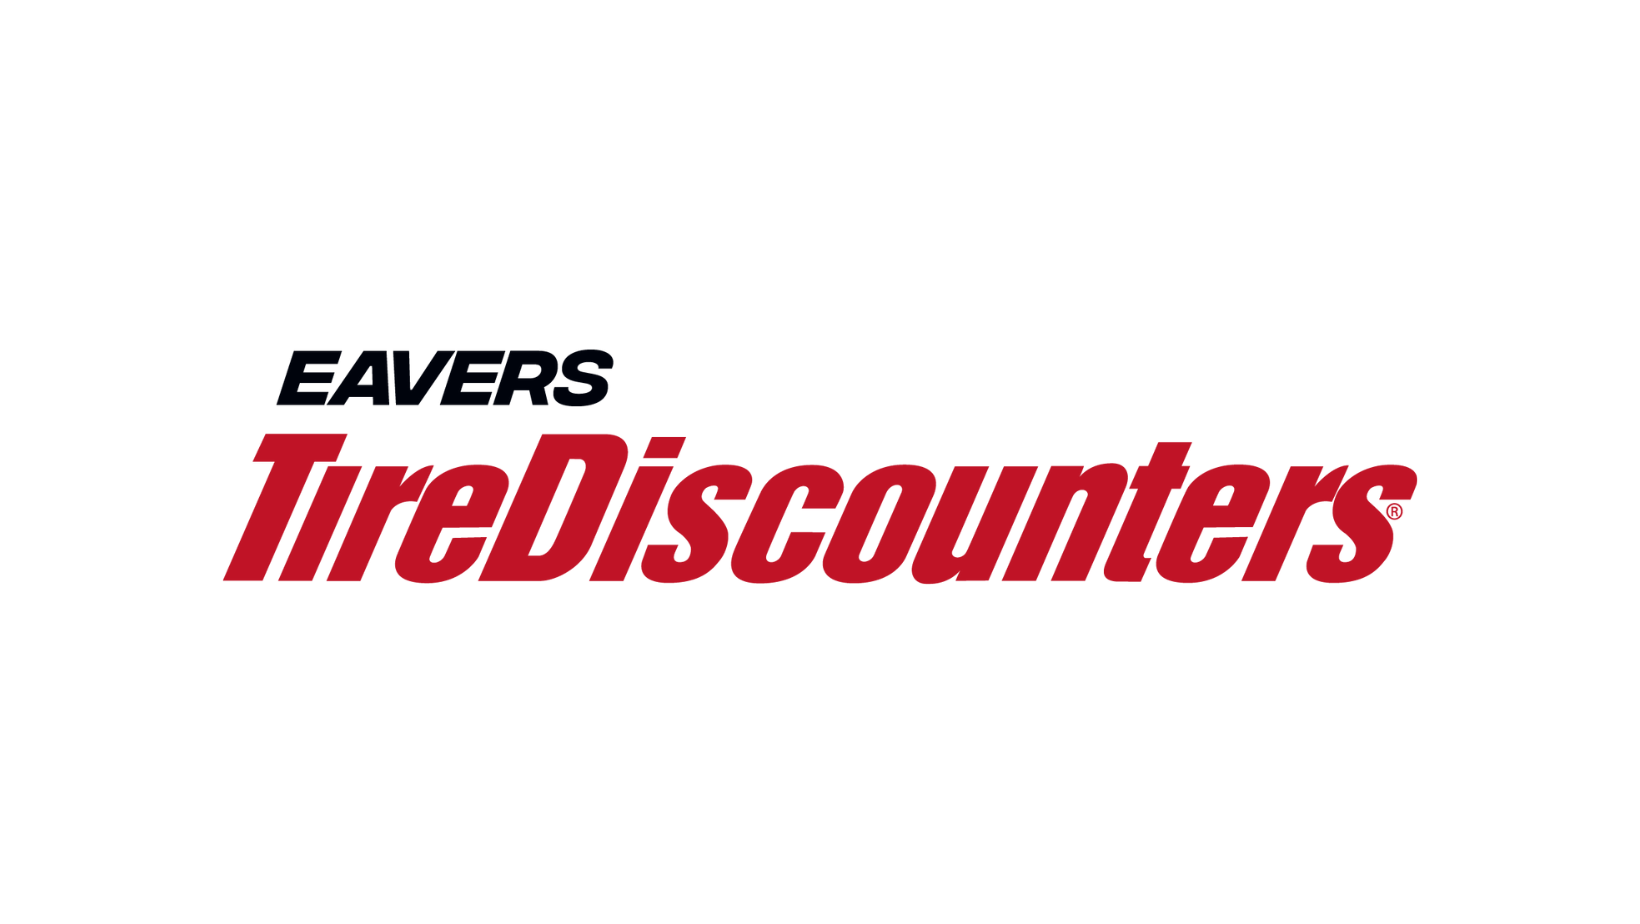 Eavers Tire Discounters on 27 Wilson Blvd. in Fishersville Eavers Tire Discounters Fishersville (540)942-4053